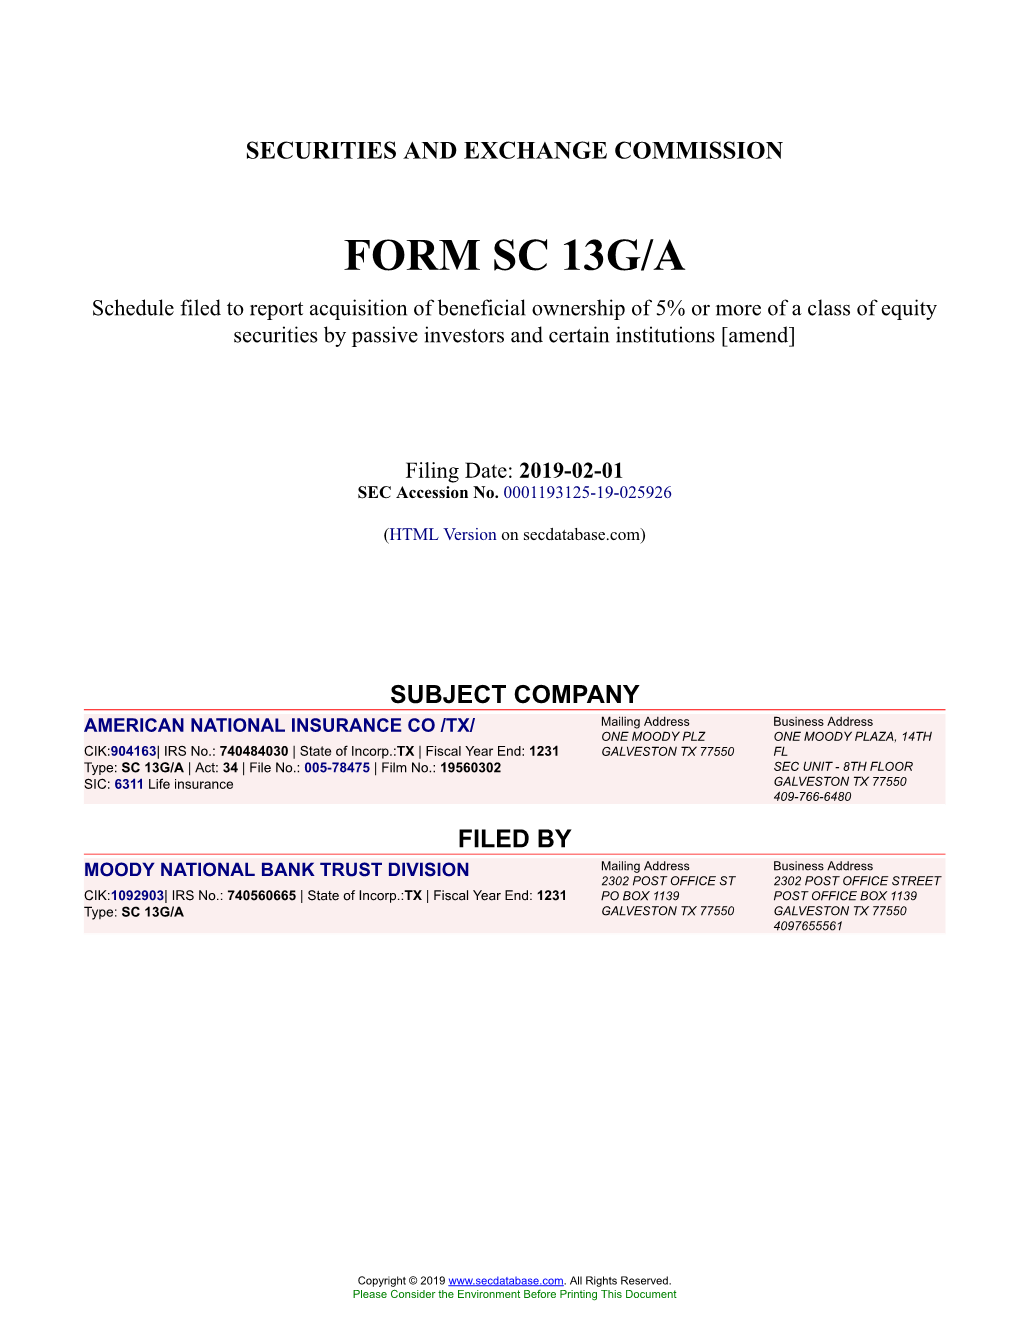 AMERICAN NATIONAL INSURANCE CO /TX/ Form SC 13G/A Filed 2019